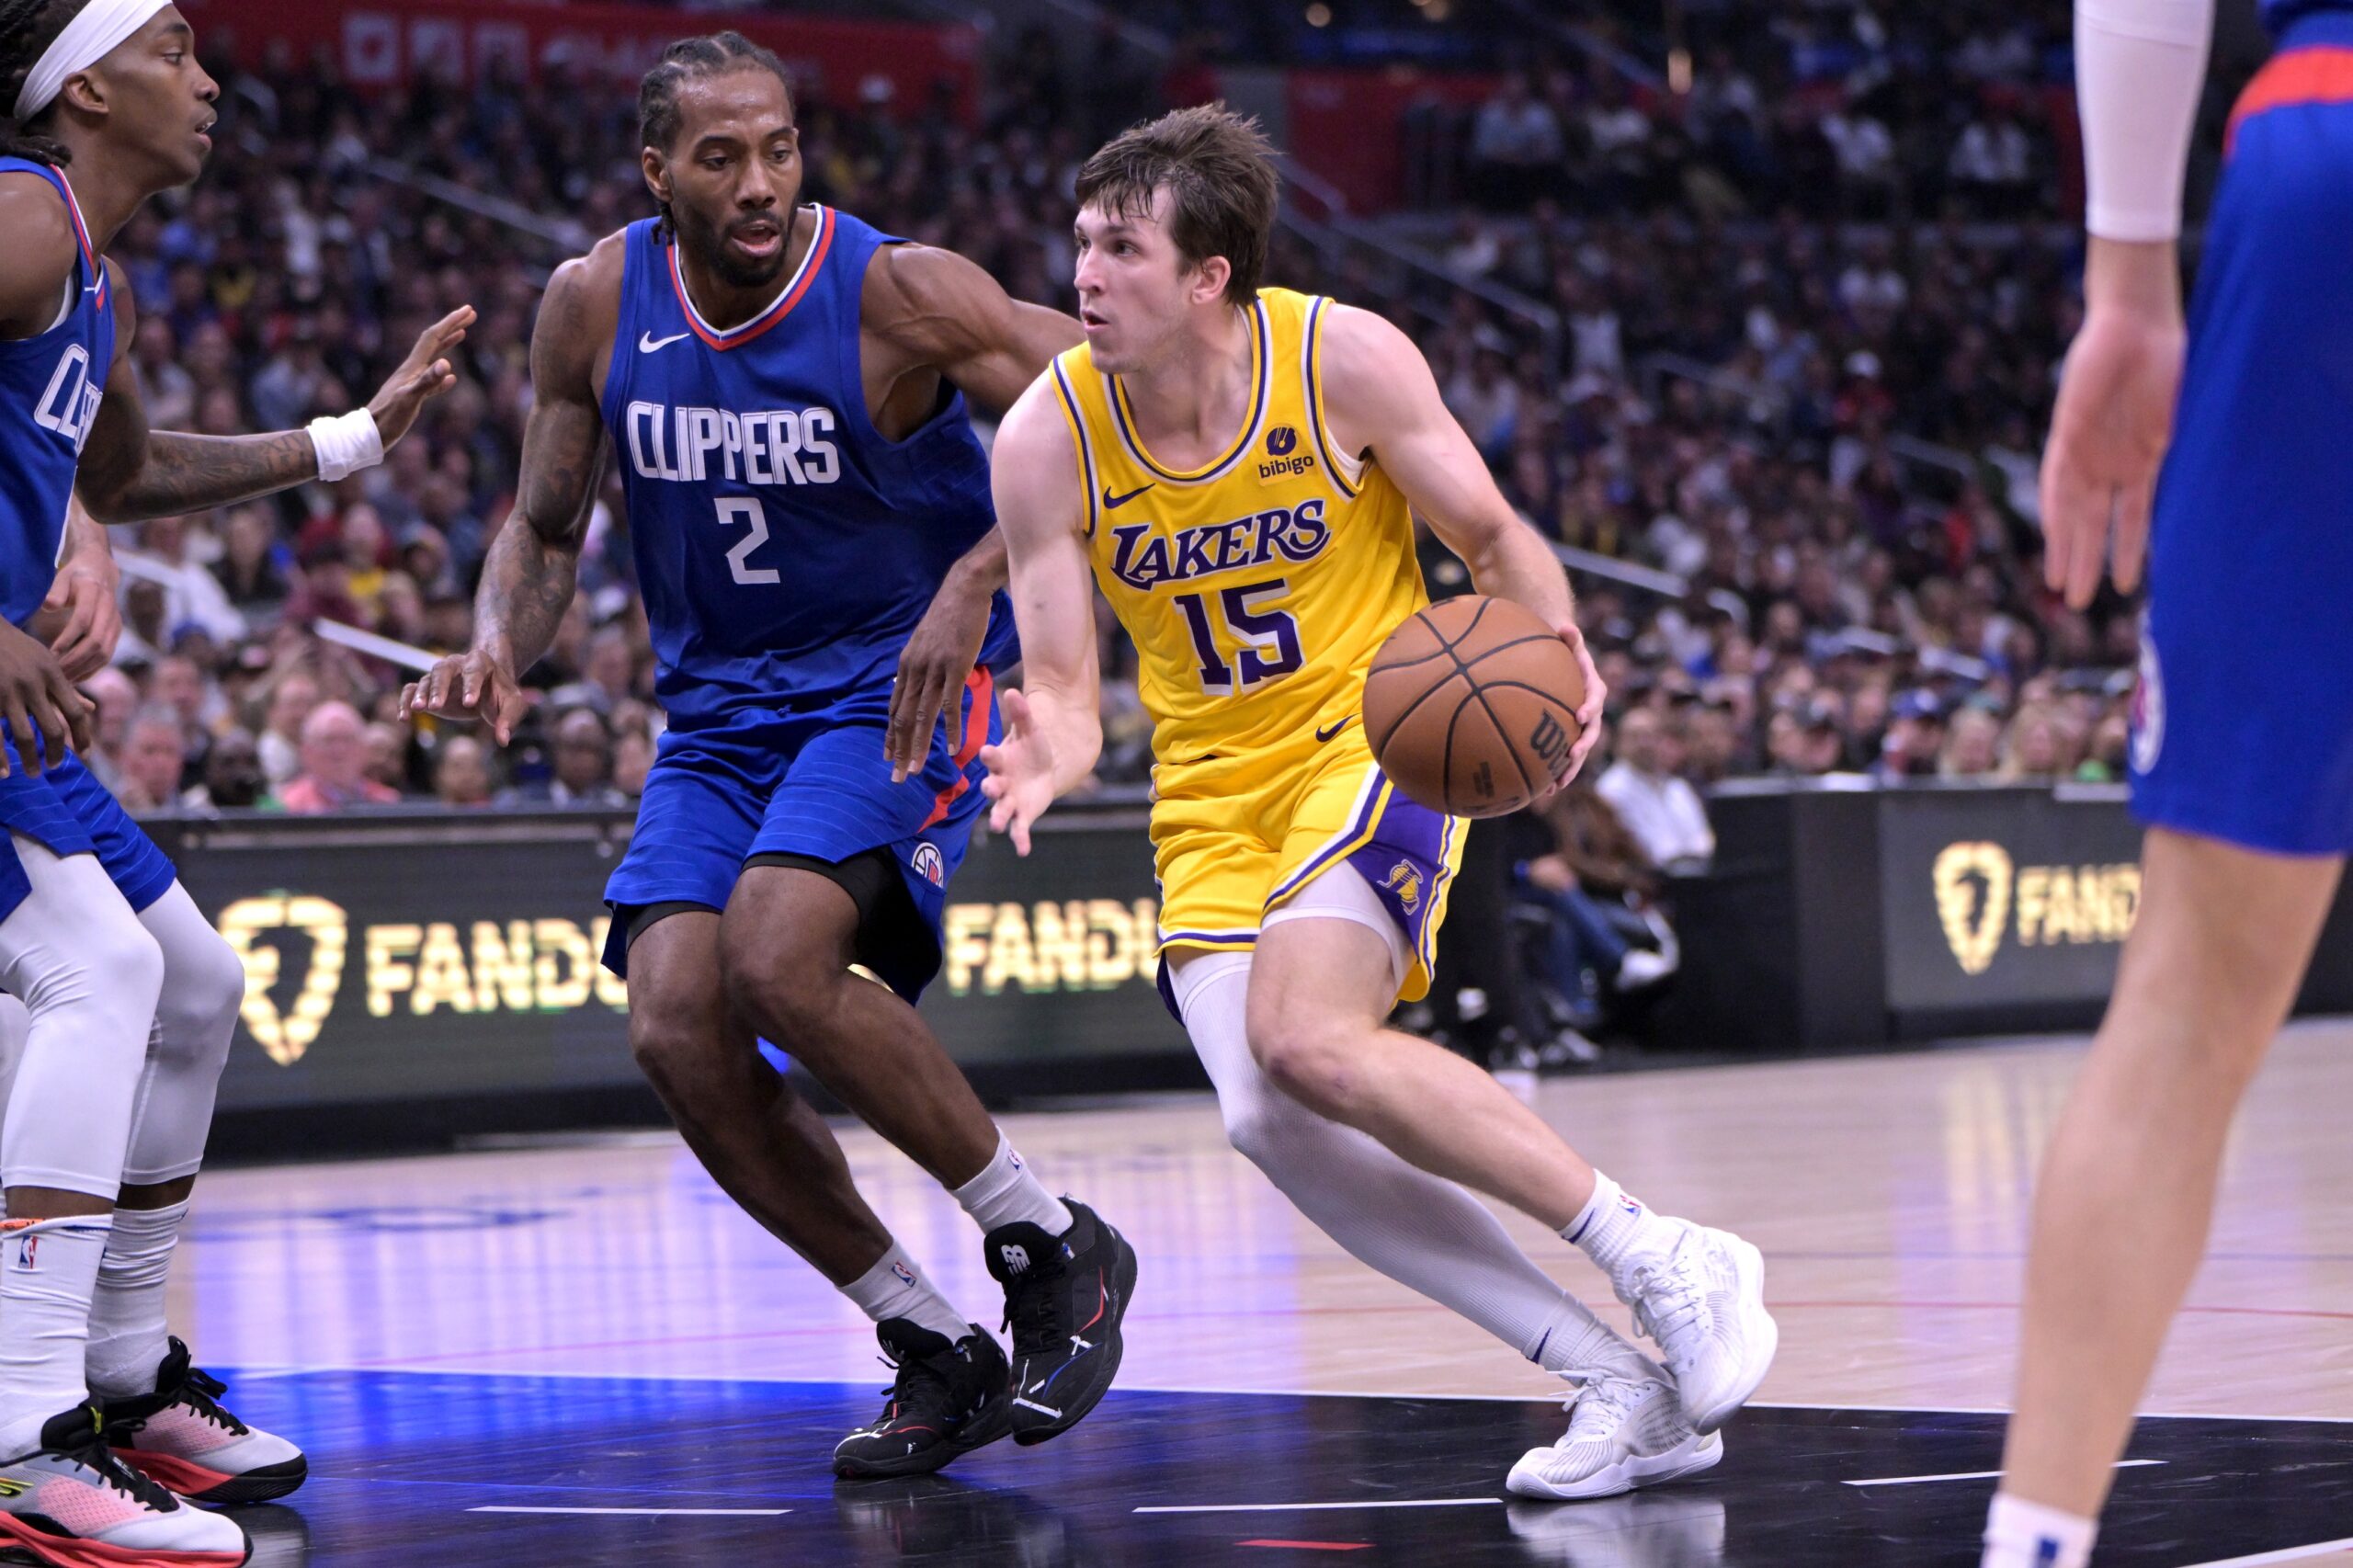 The Lakers vs Clippers rivalry is shifting as arenas are changing.